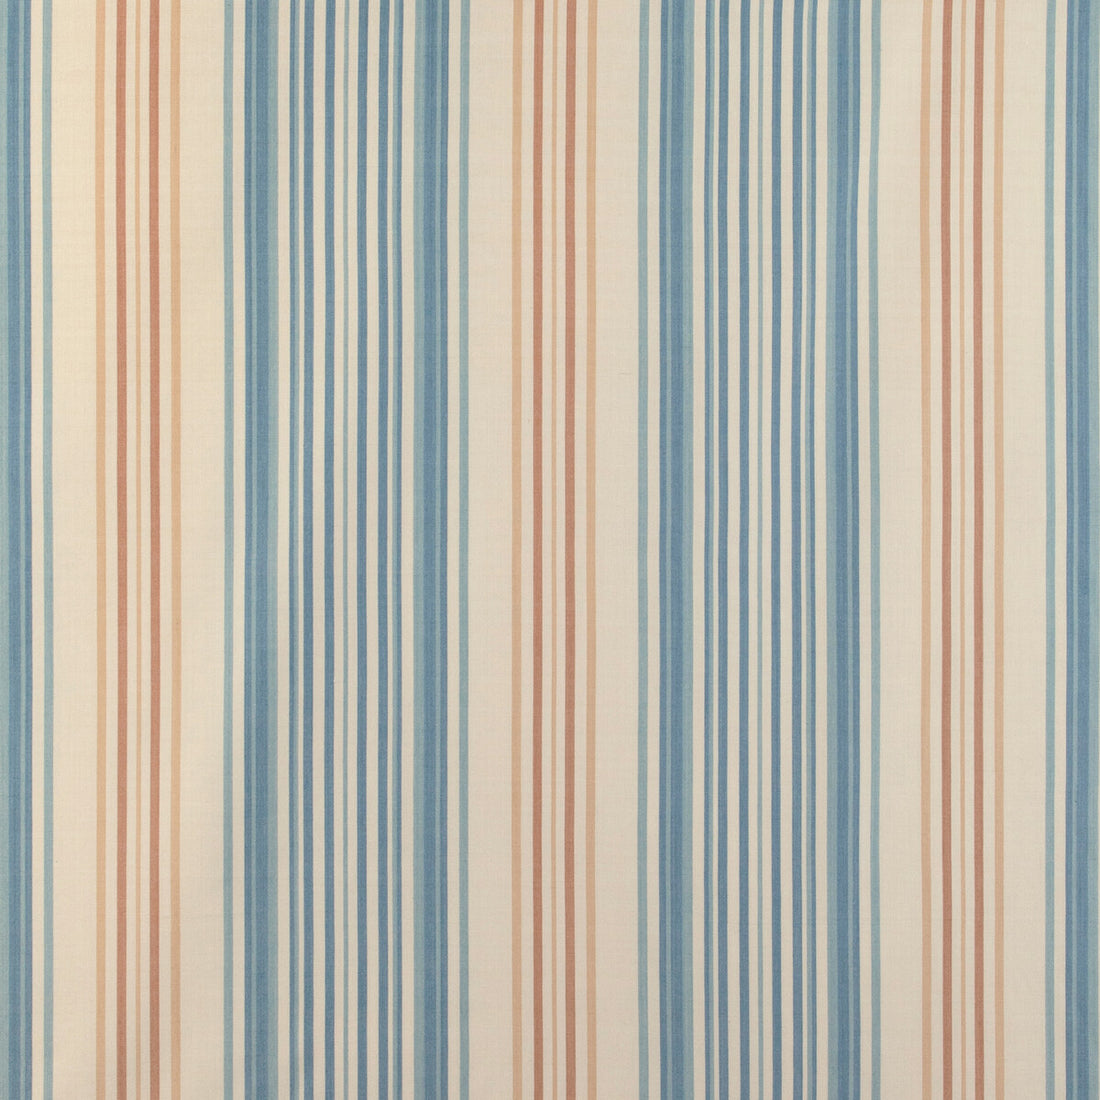 Upland Stripe fabric in azure color - pattern 2023104.516.0 - by Lee Jofa in the Highfield Stripes And Plaids collection